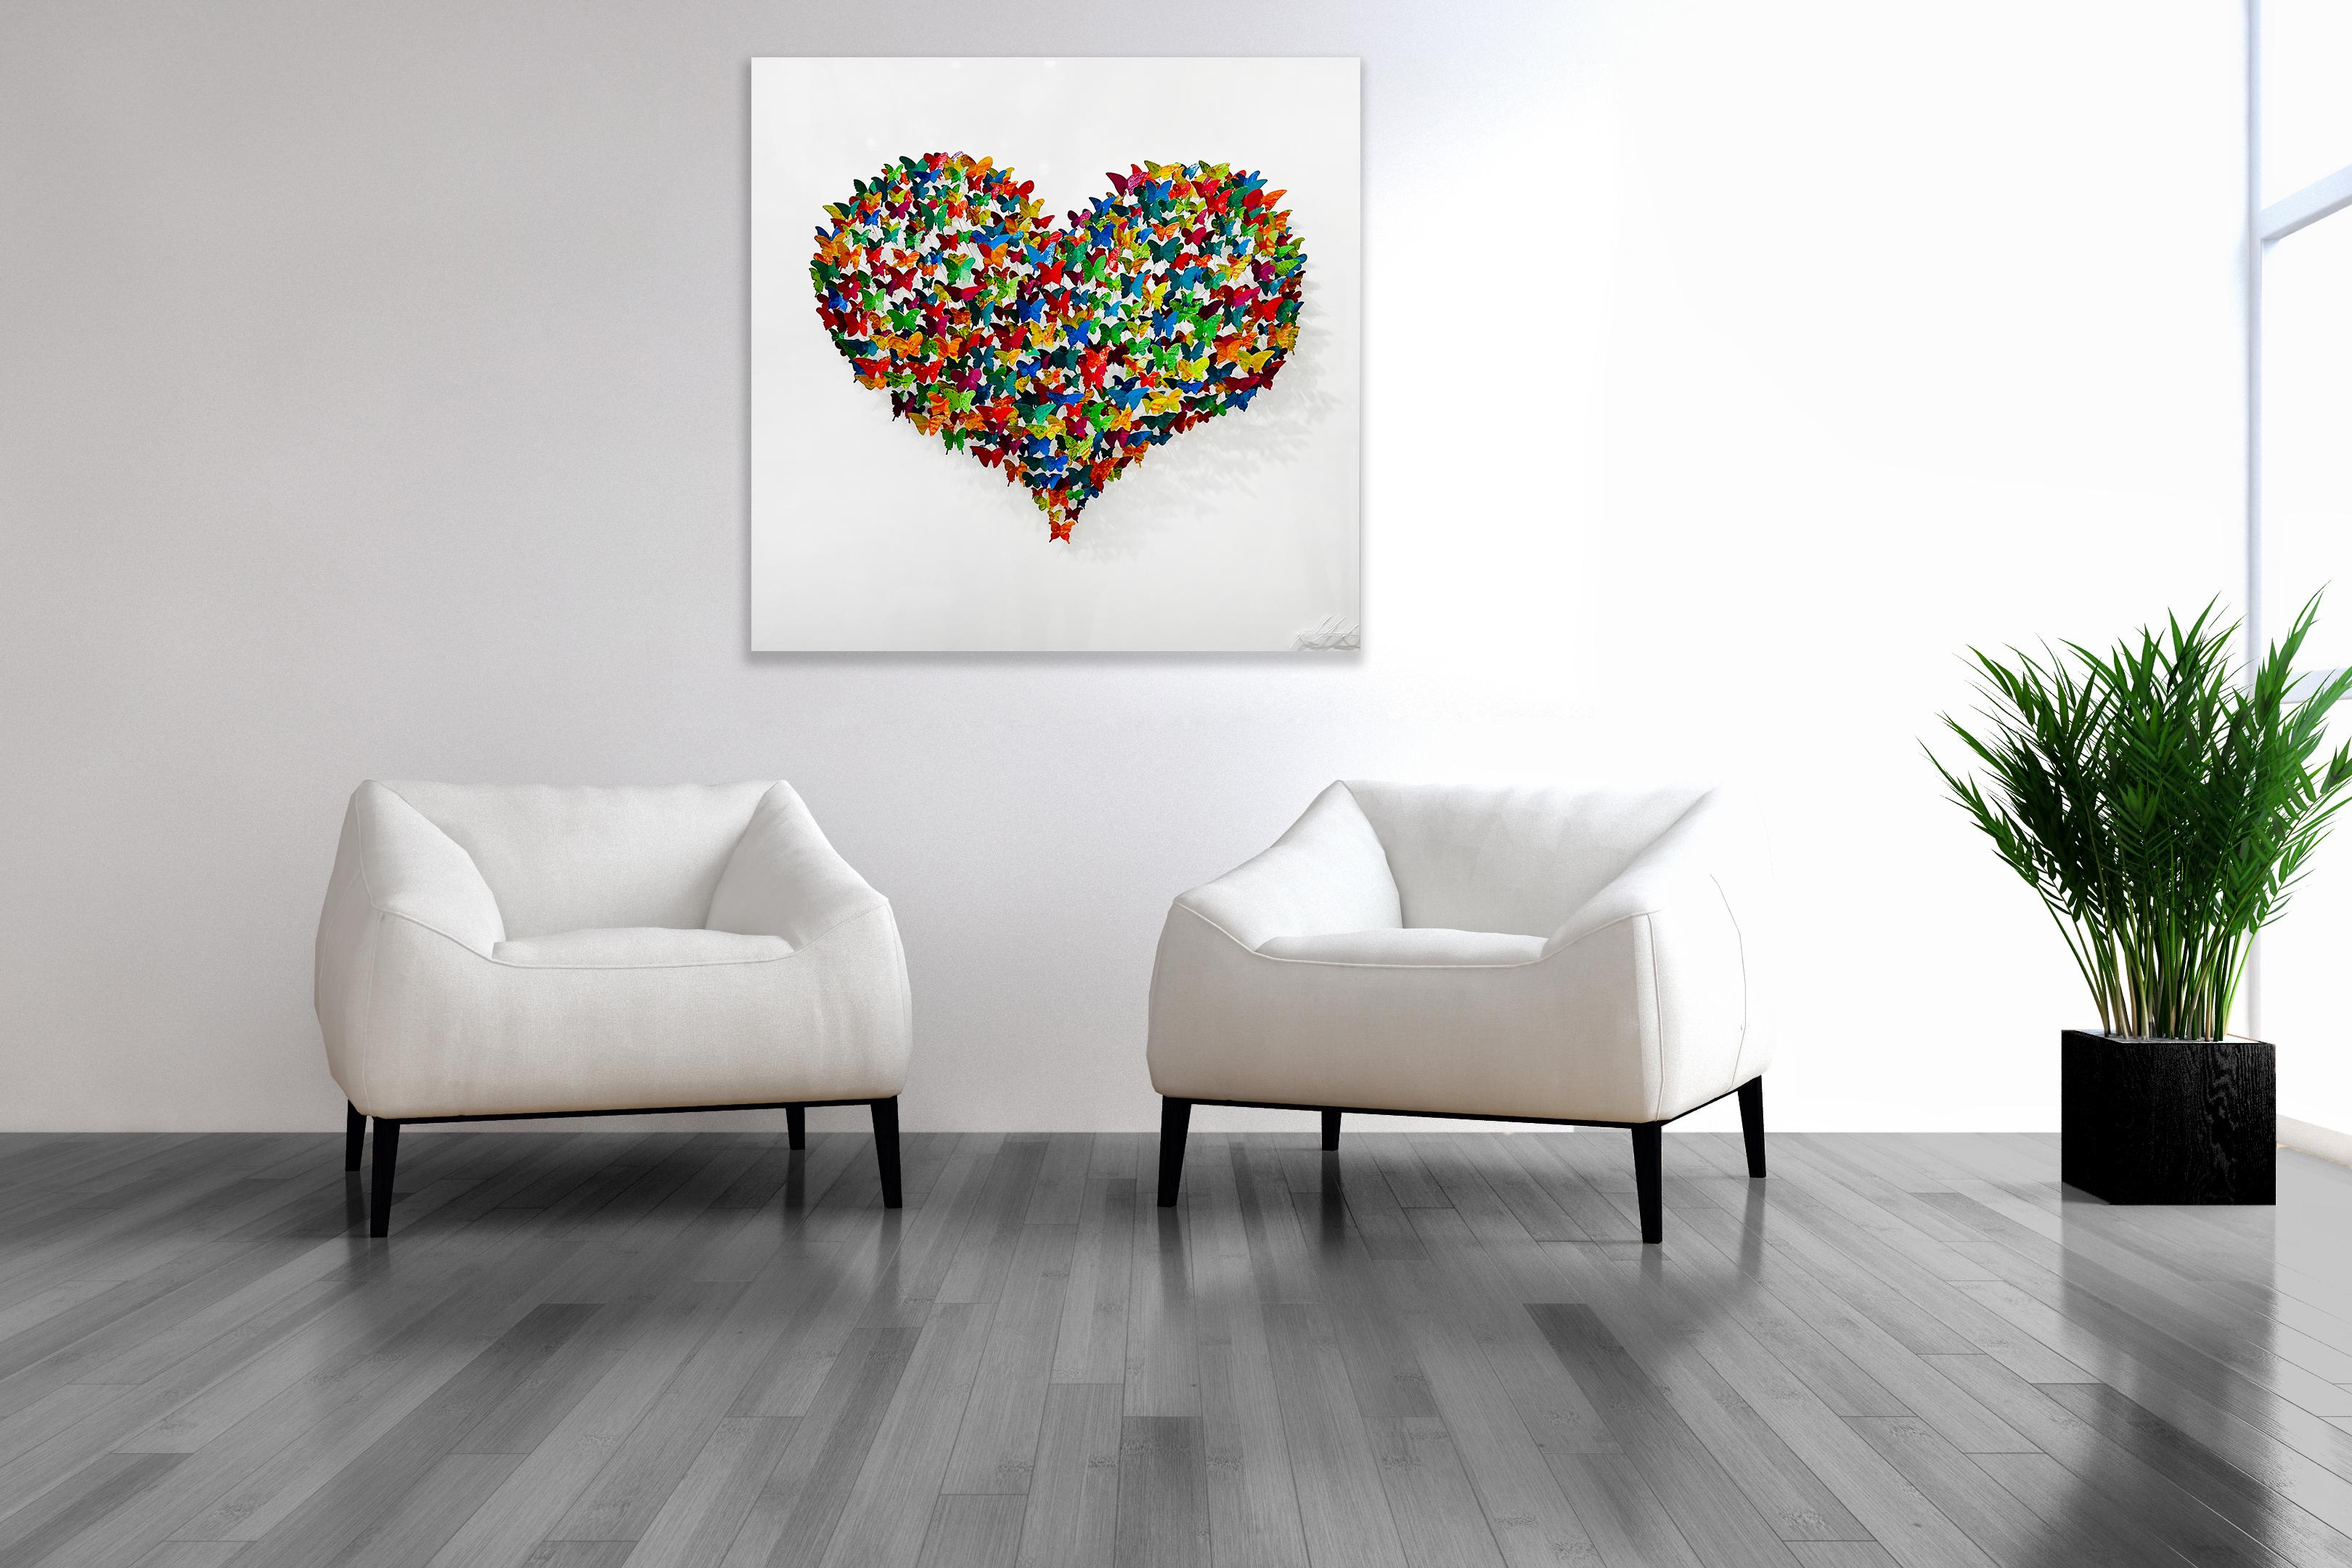 Flying Love - candy, Mixed Media Metal Wall Sculpture - Contemporary Mixed Media Art by Joel Amit